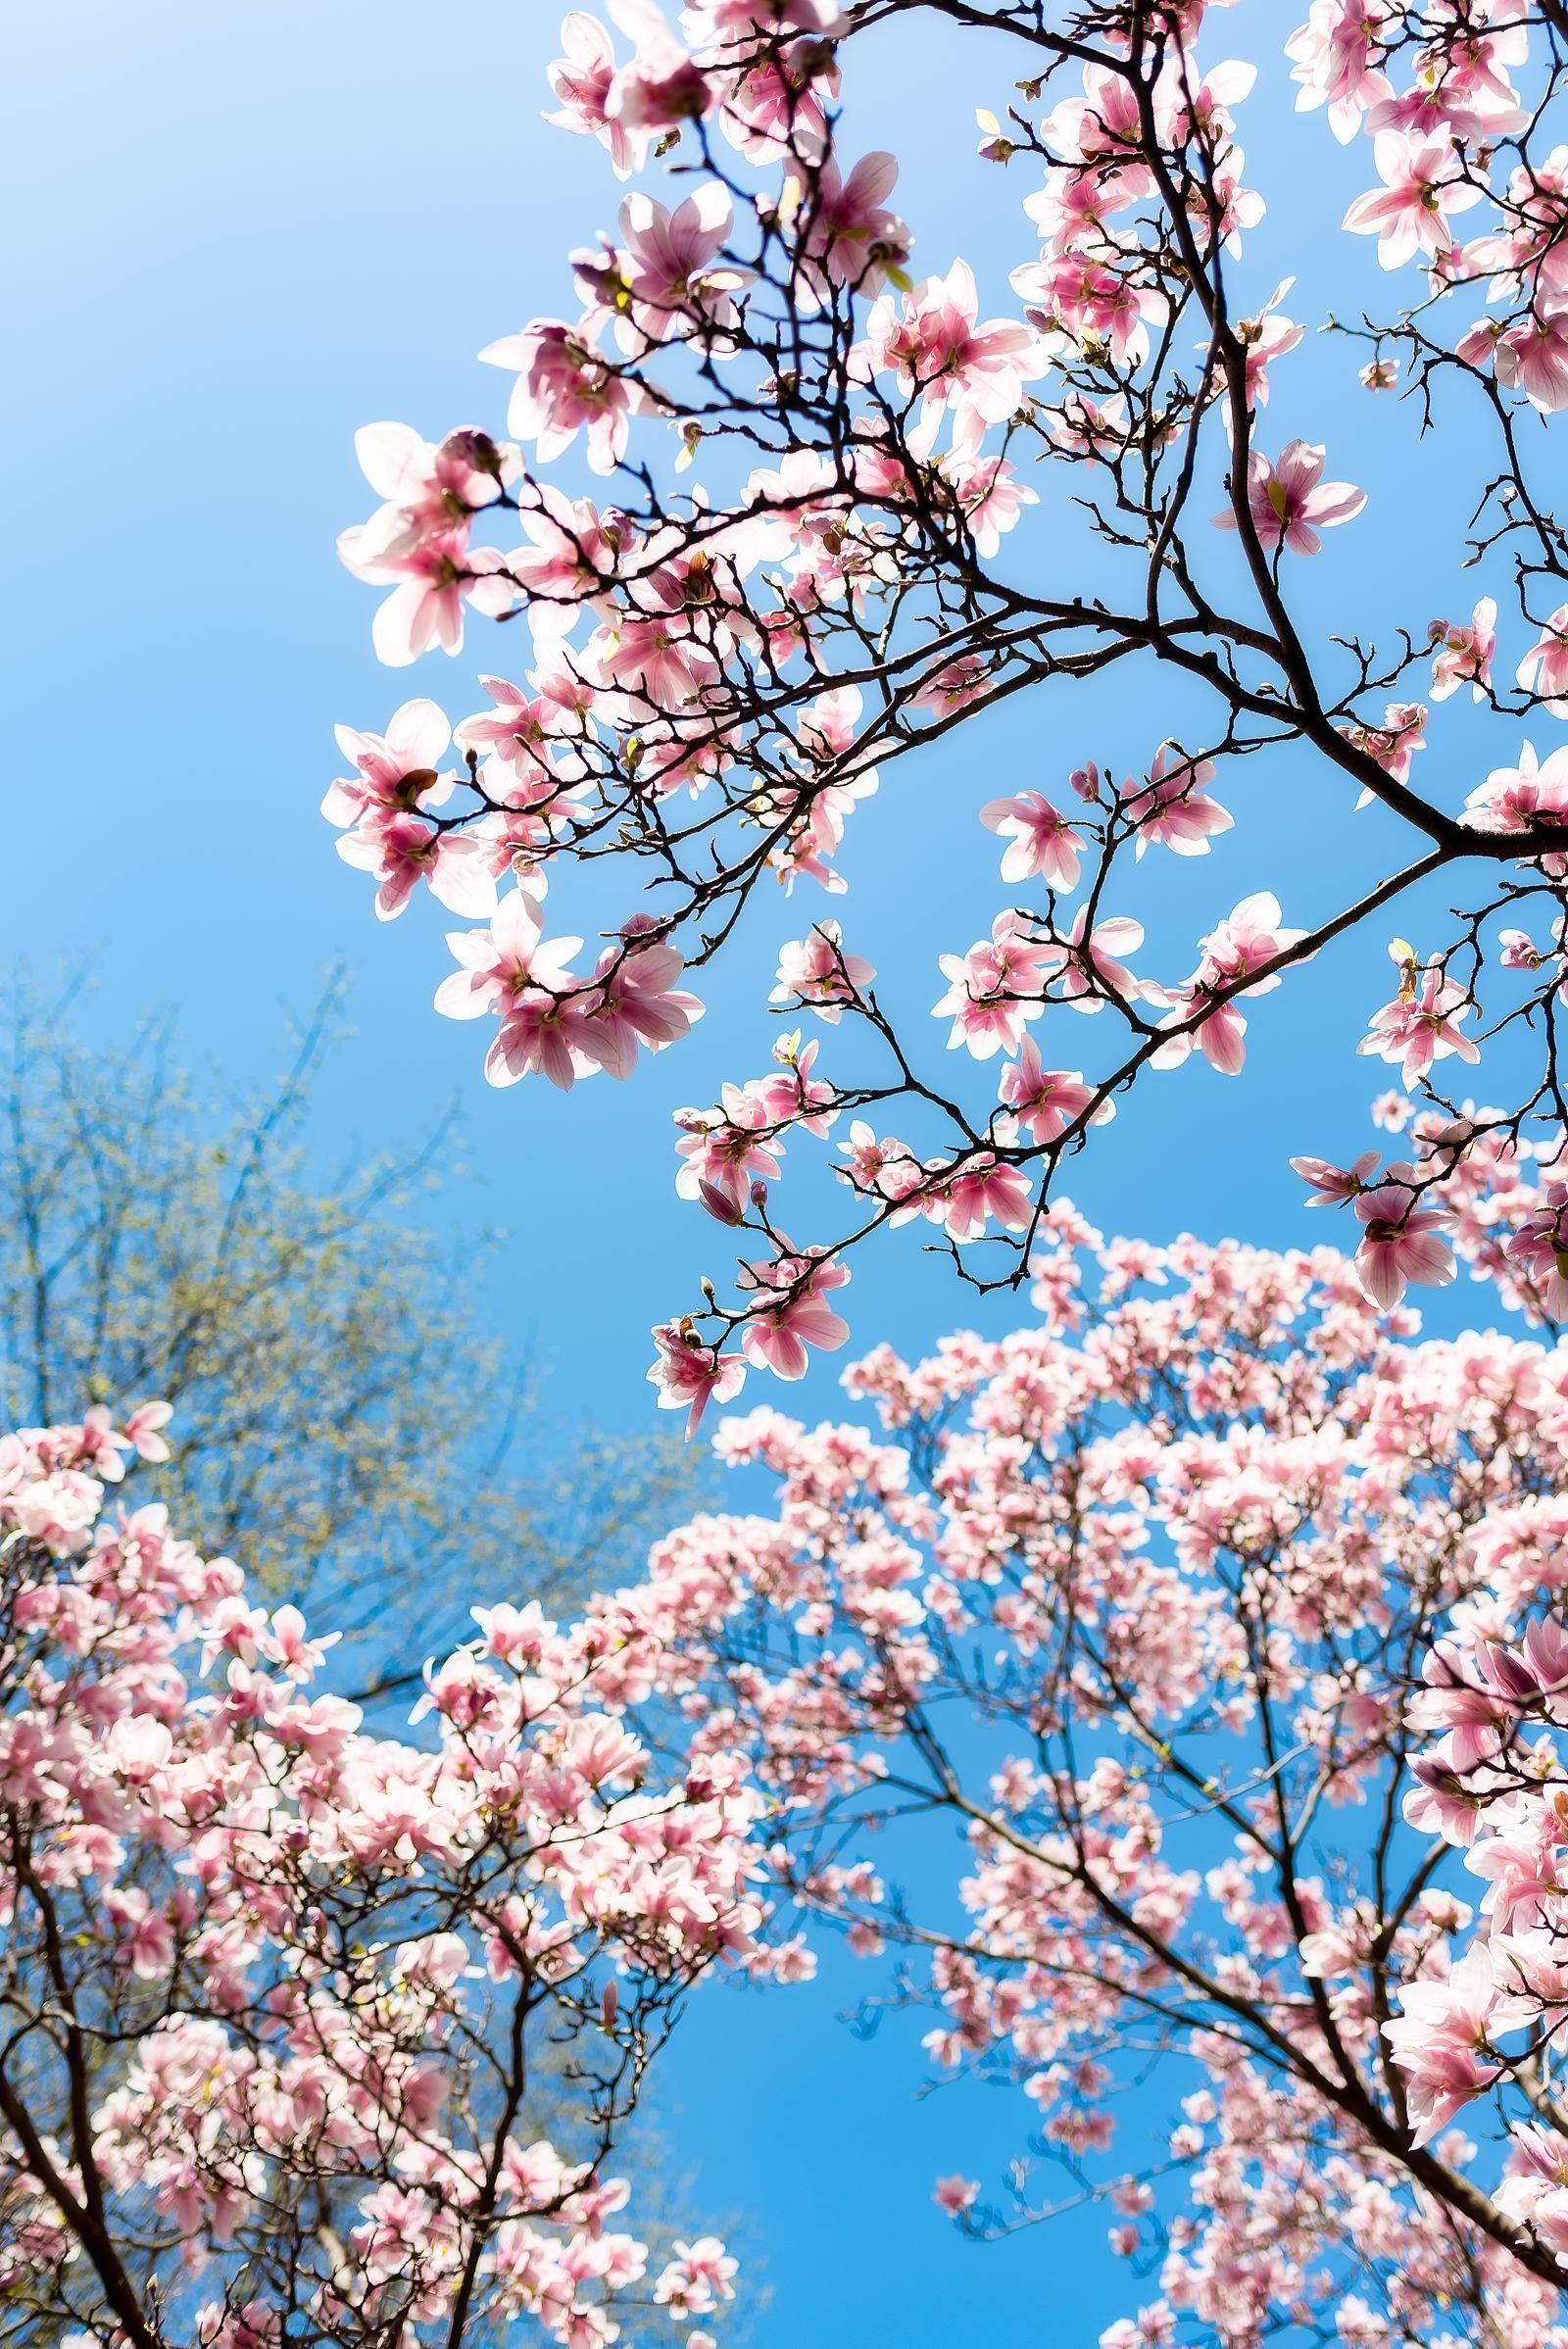 Aesthetic Spring Wallpapers Images  Free Download on Freepik